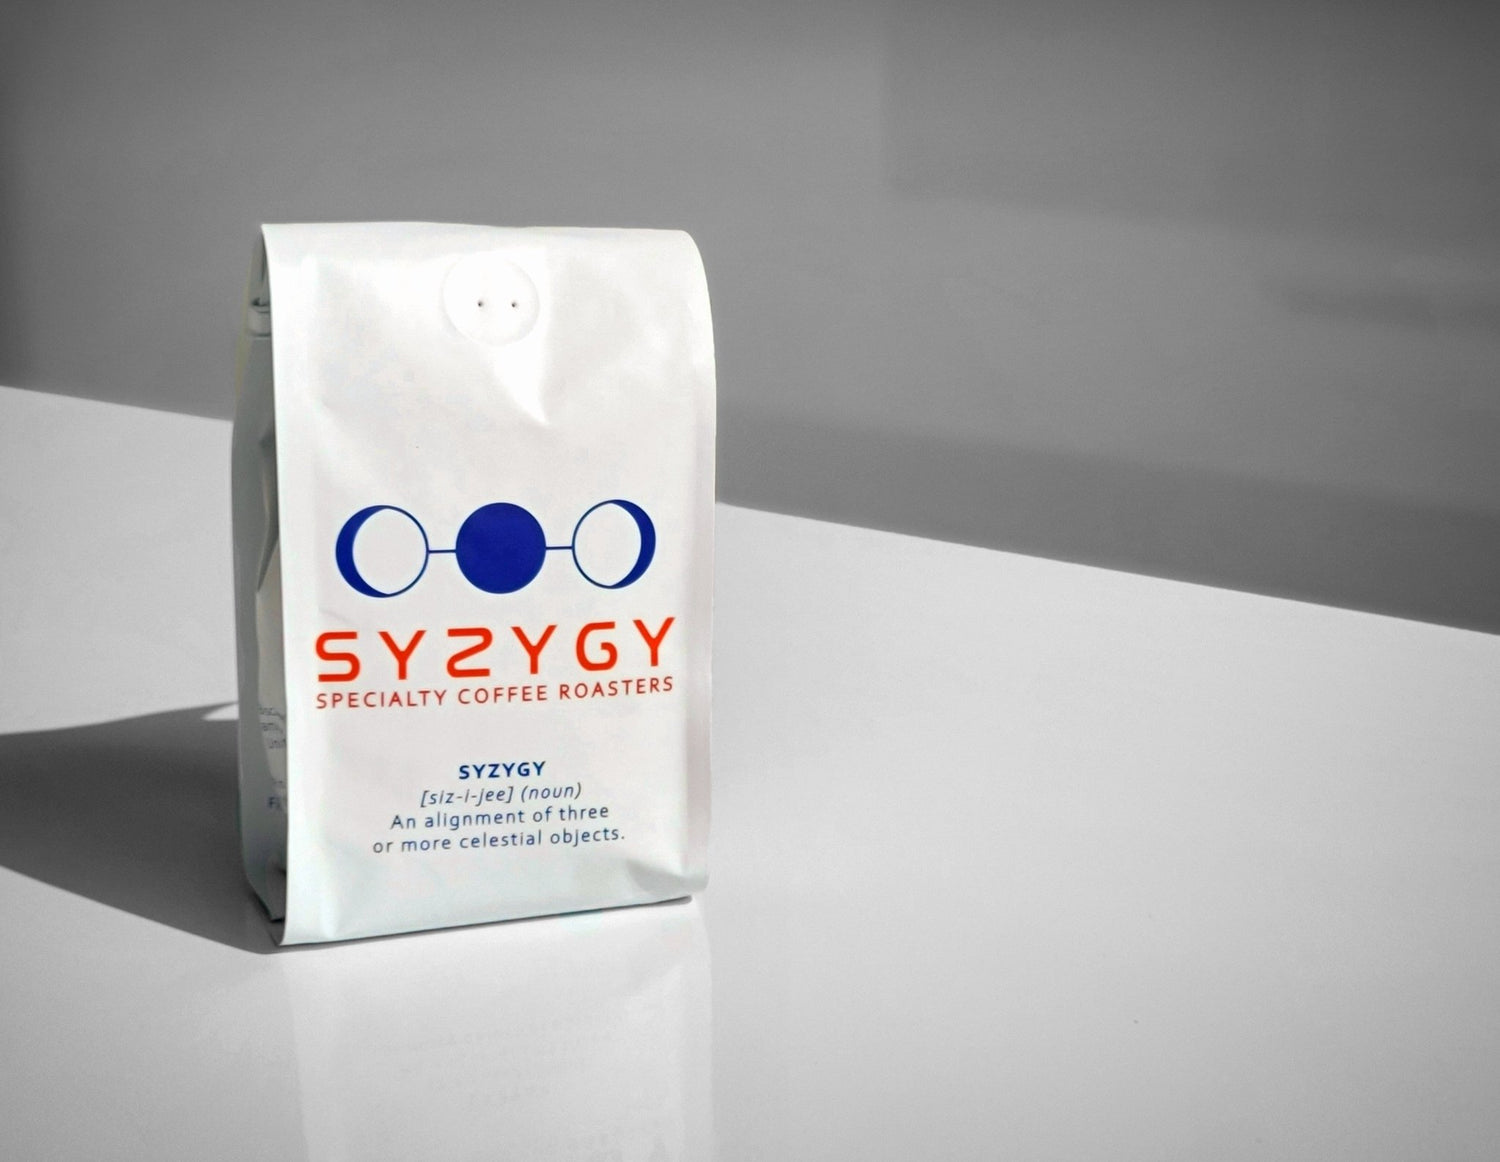 All Coffee - Syzygy Coffee - Specialty Coffee Roasters